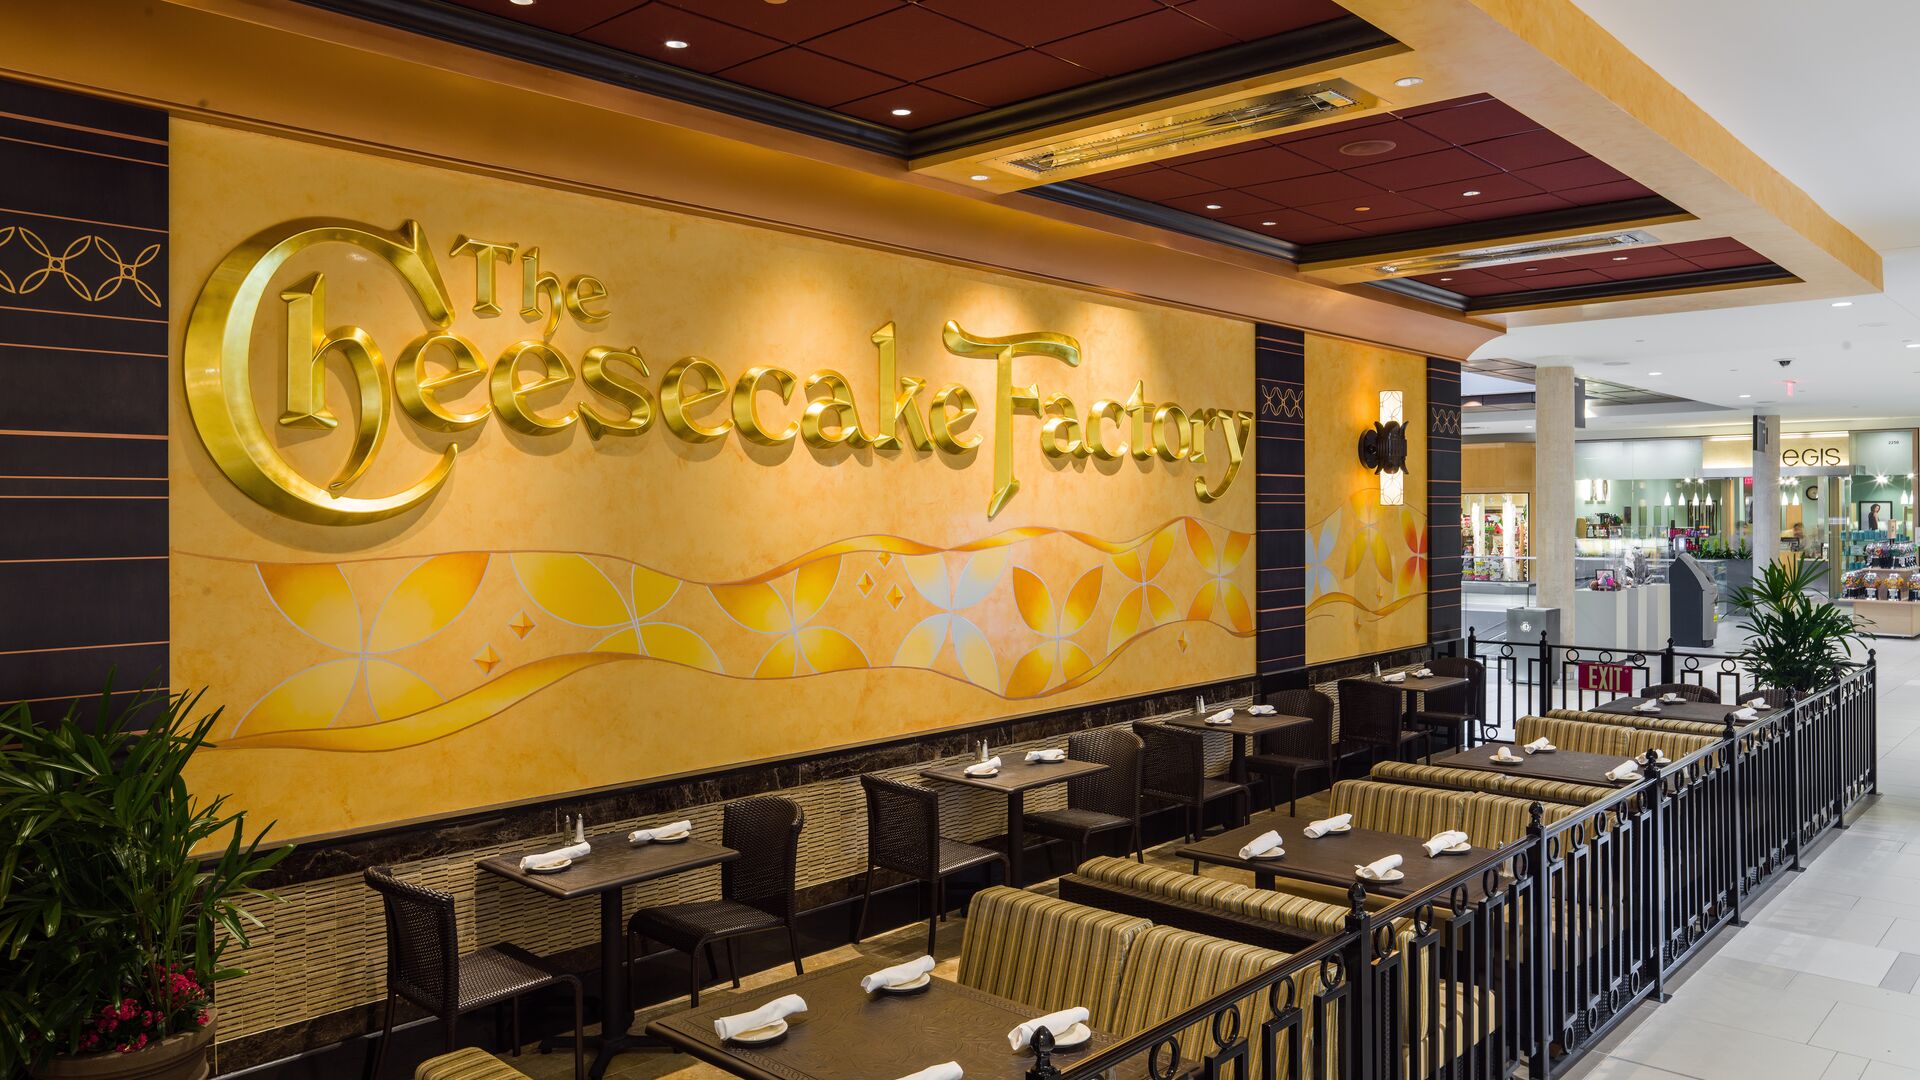 Cheesecake Factory within the mall and seating